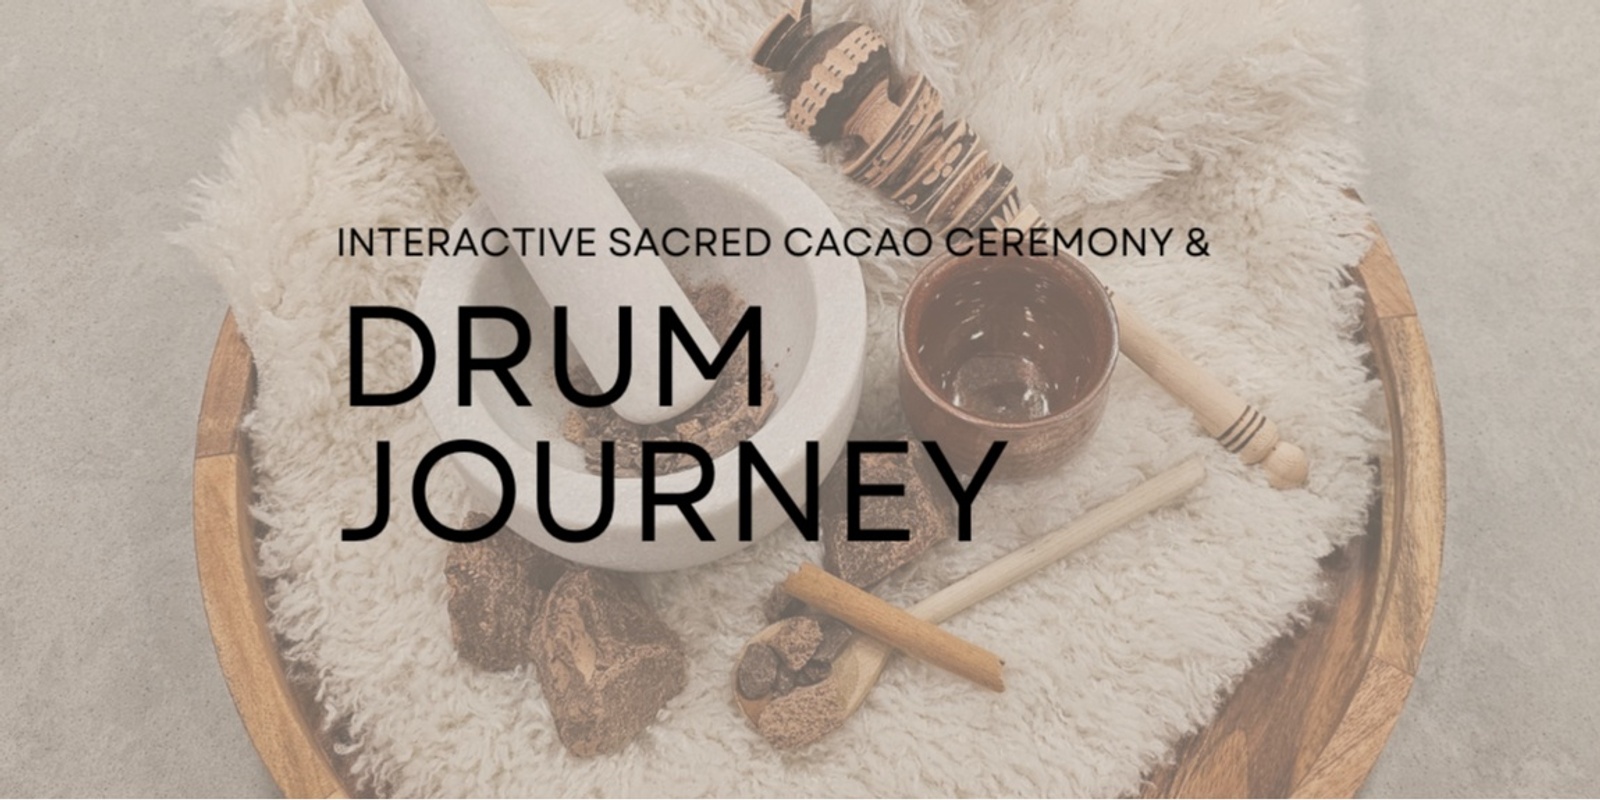 Banner image for INTERACTIVE SACRED CACAO CEREMONY AND DRUM JOURNEY 